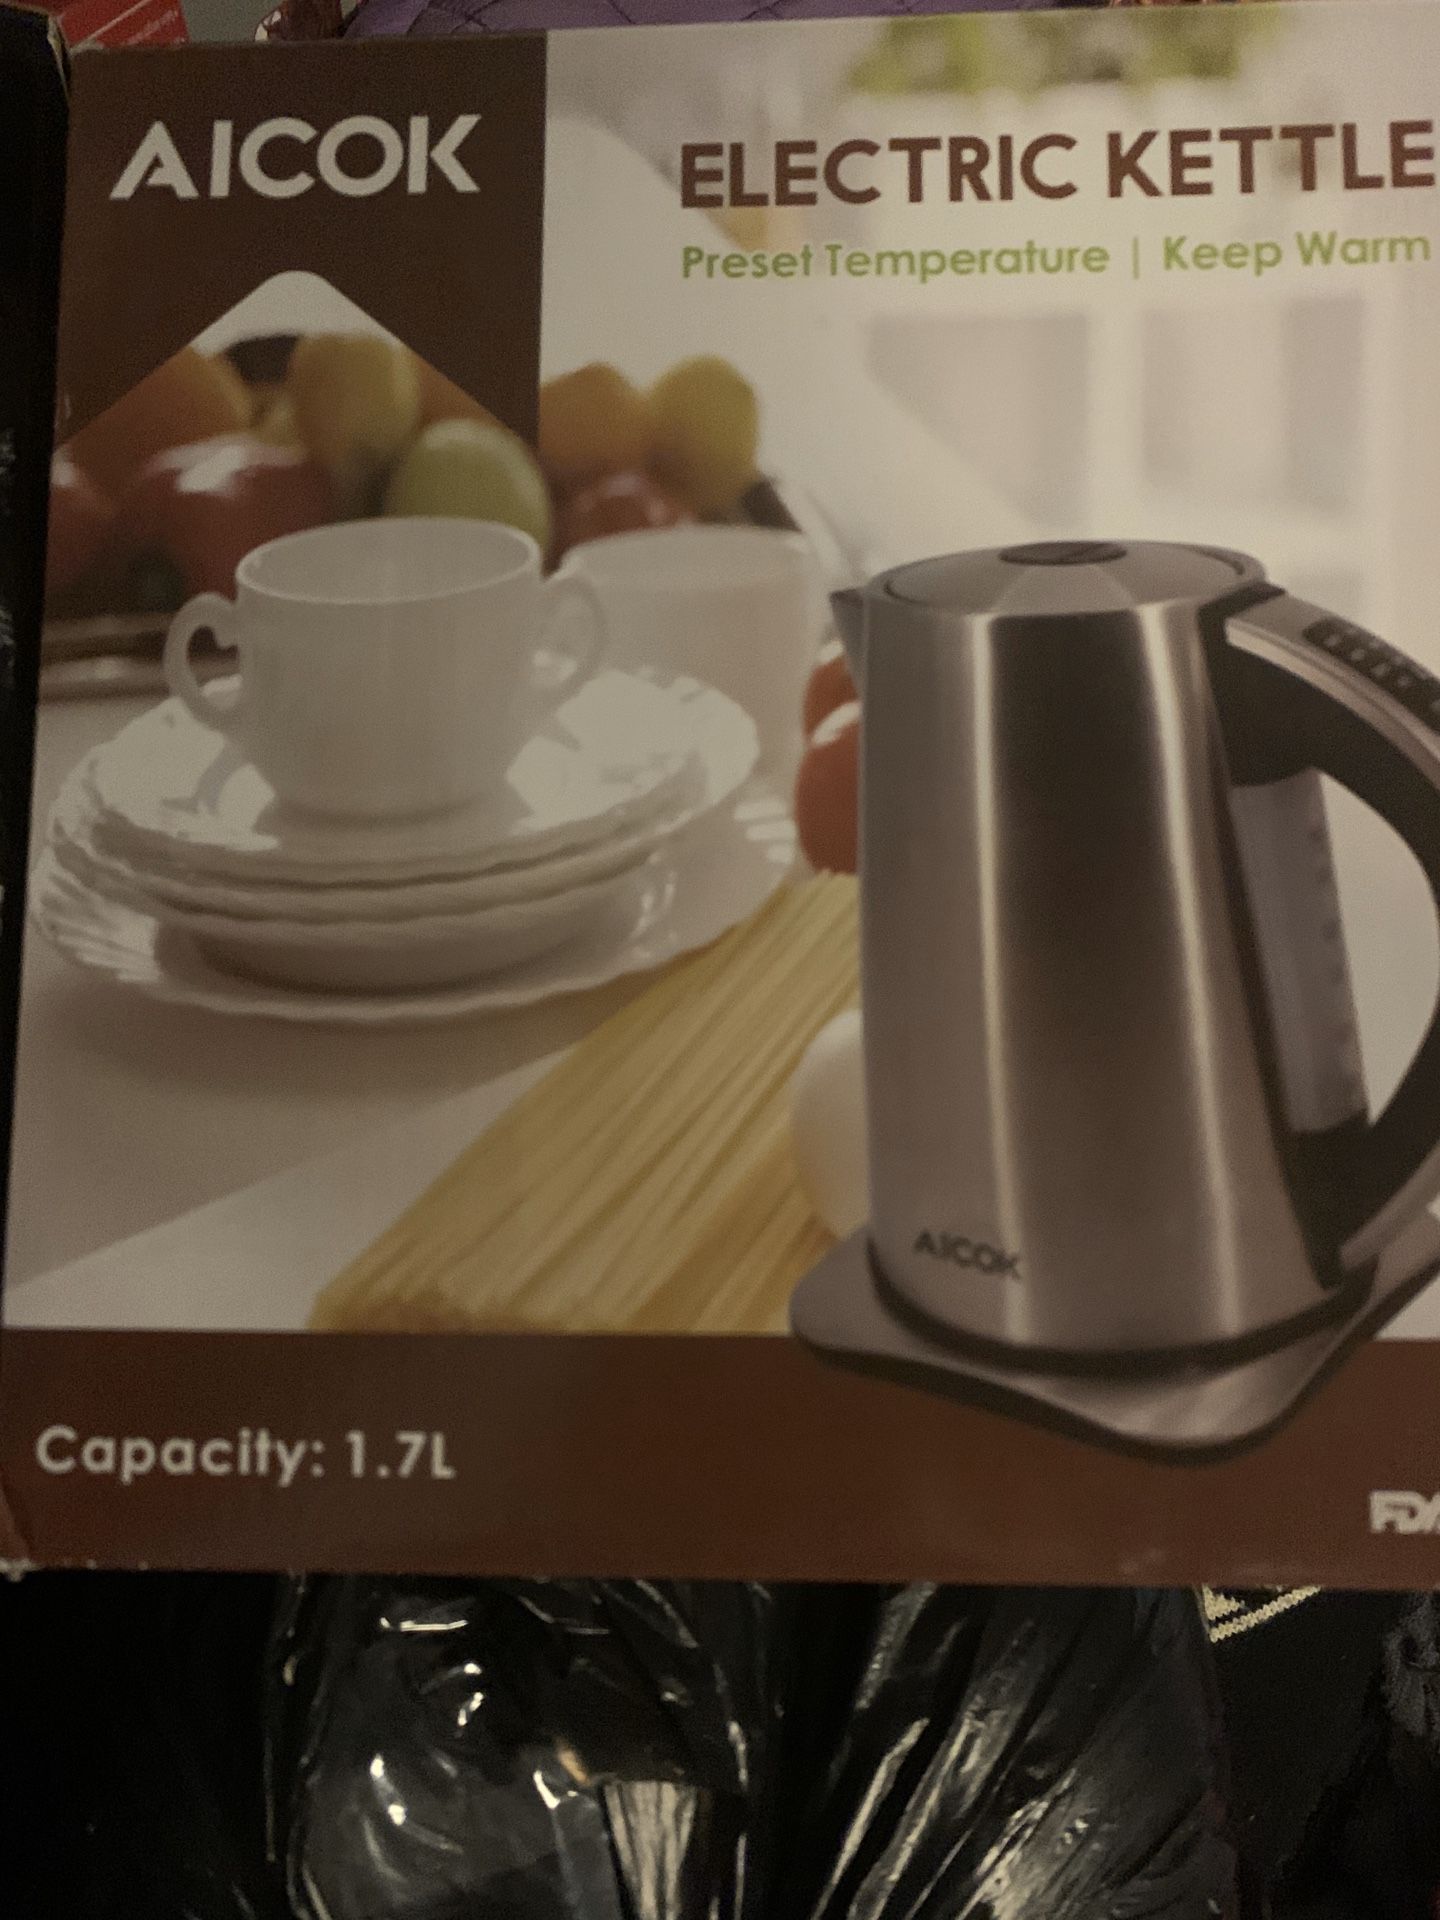 Aicok electric kettle